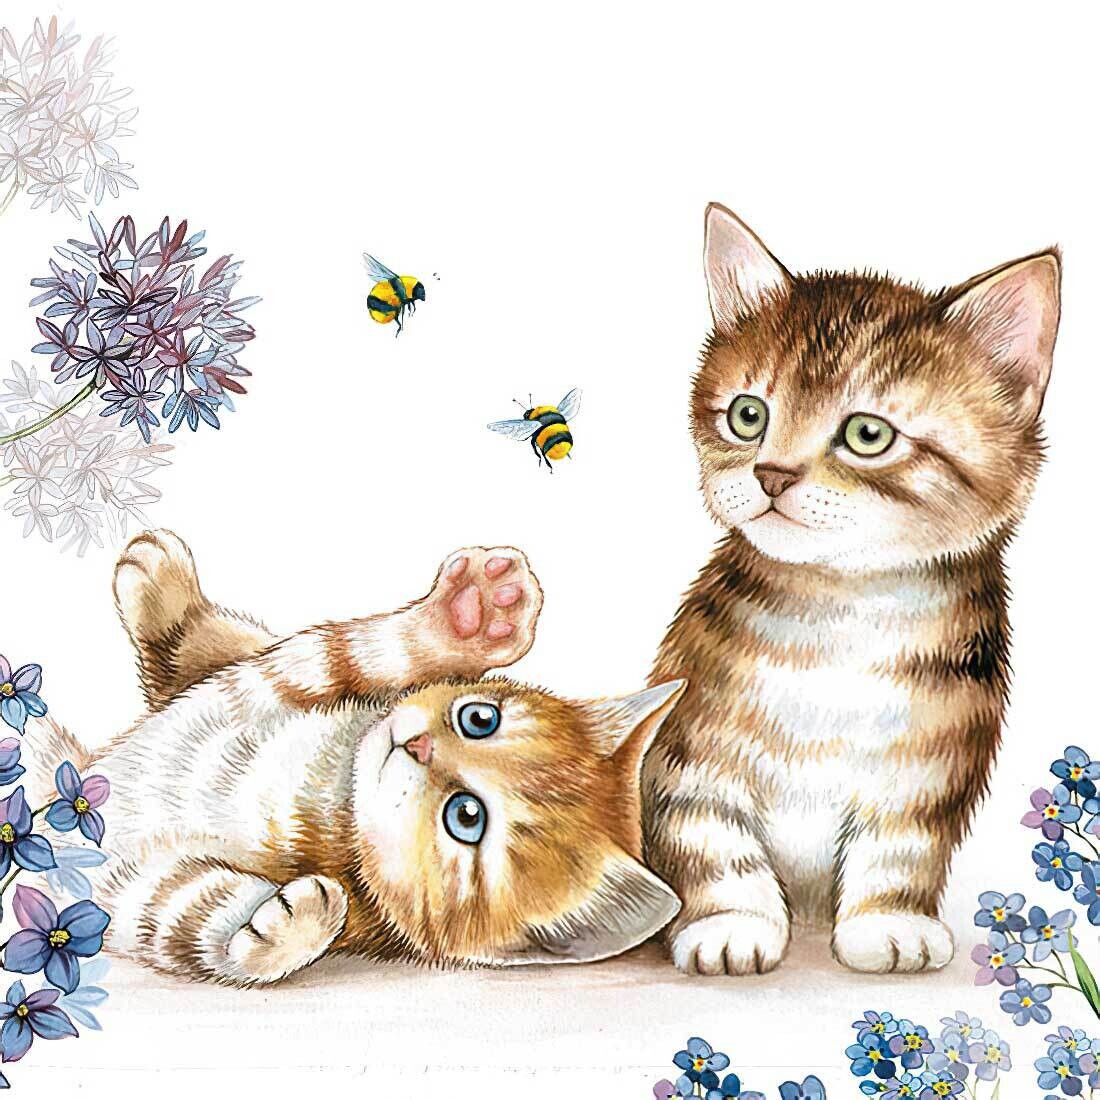 Decoupage Paper Napkins - Animals - Cats and Bees Out of Stock